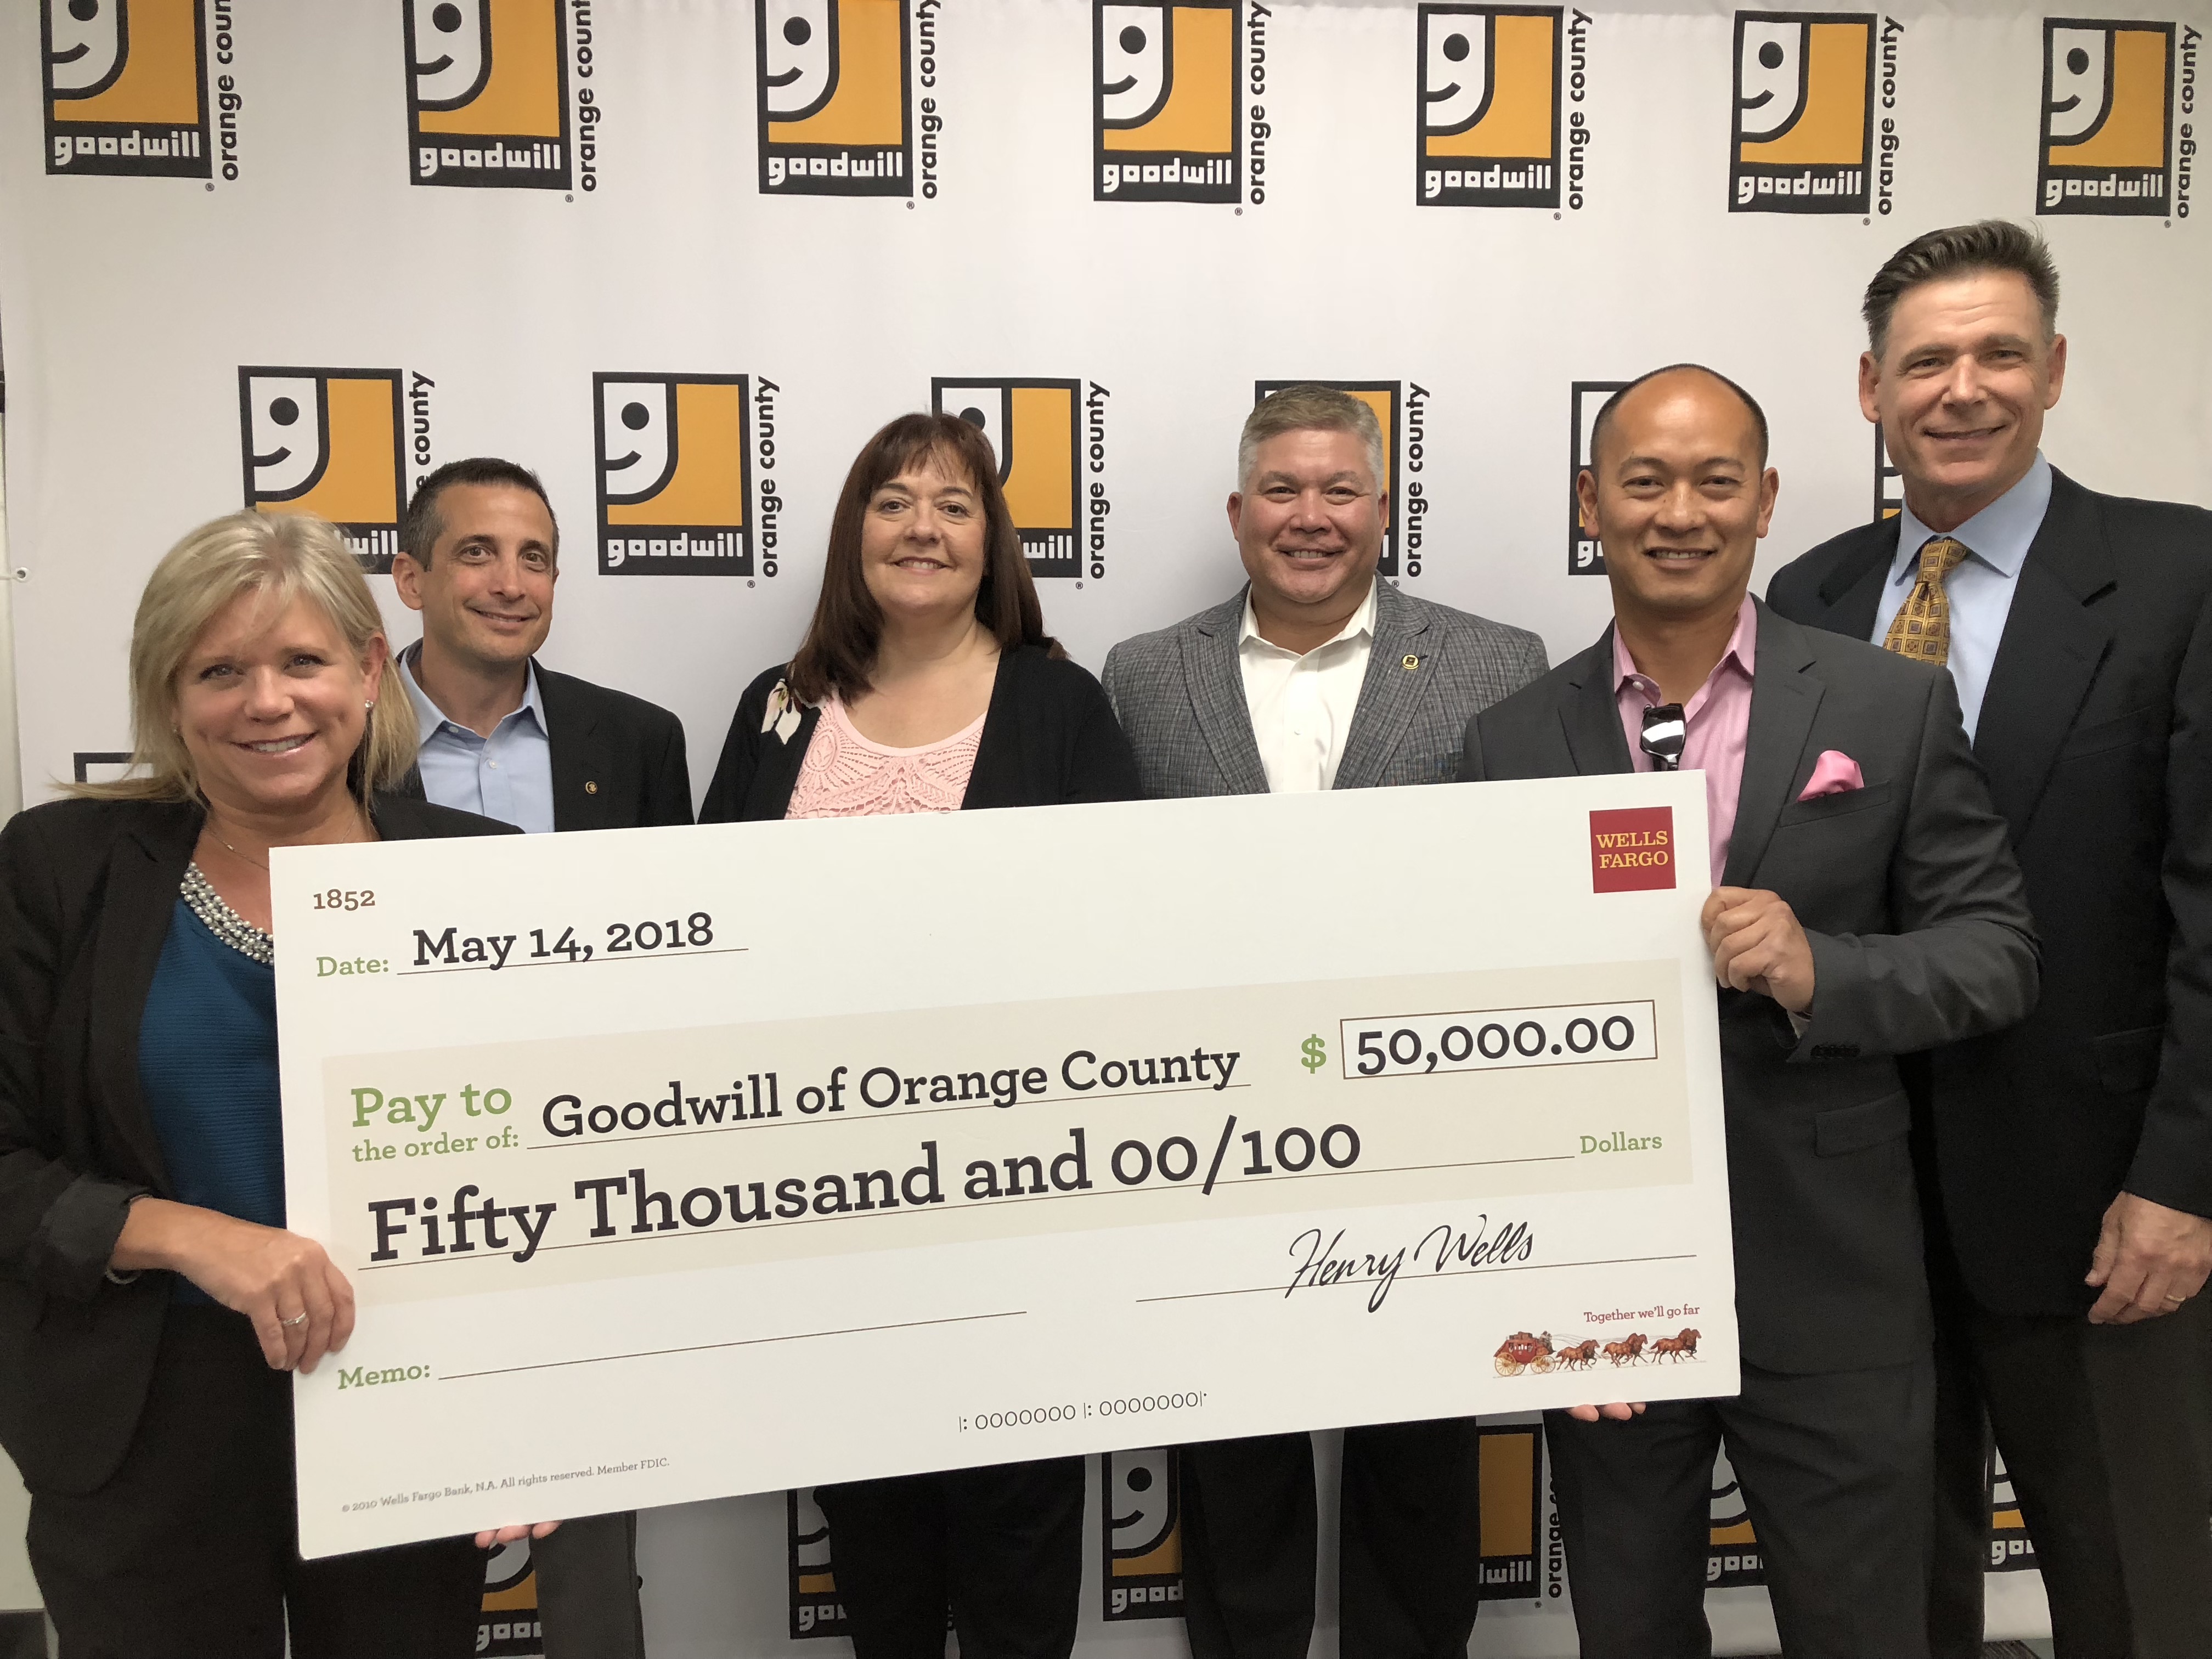 Goodwill representatives holding a $50,000 grant from Wells Fargo